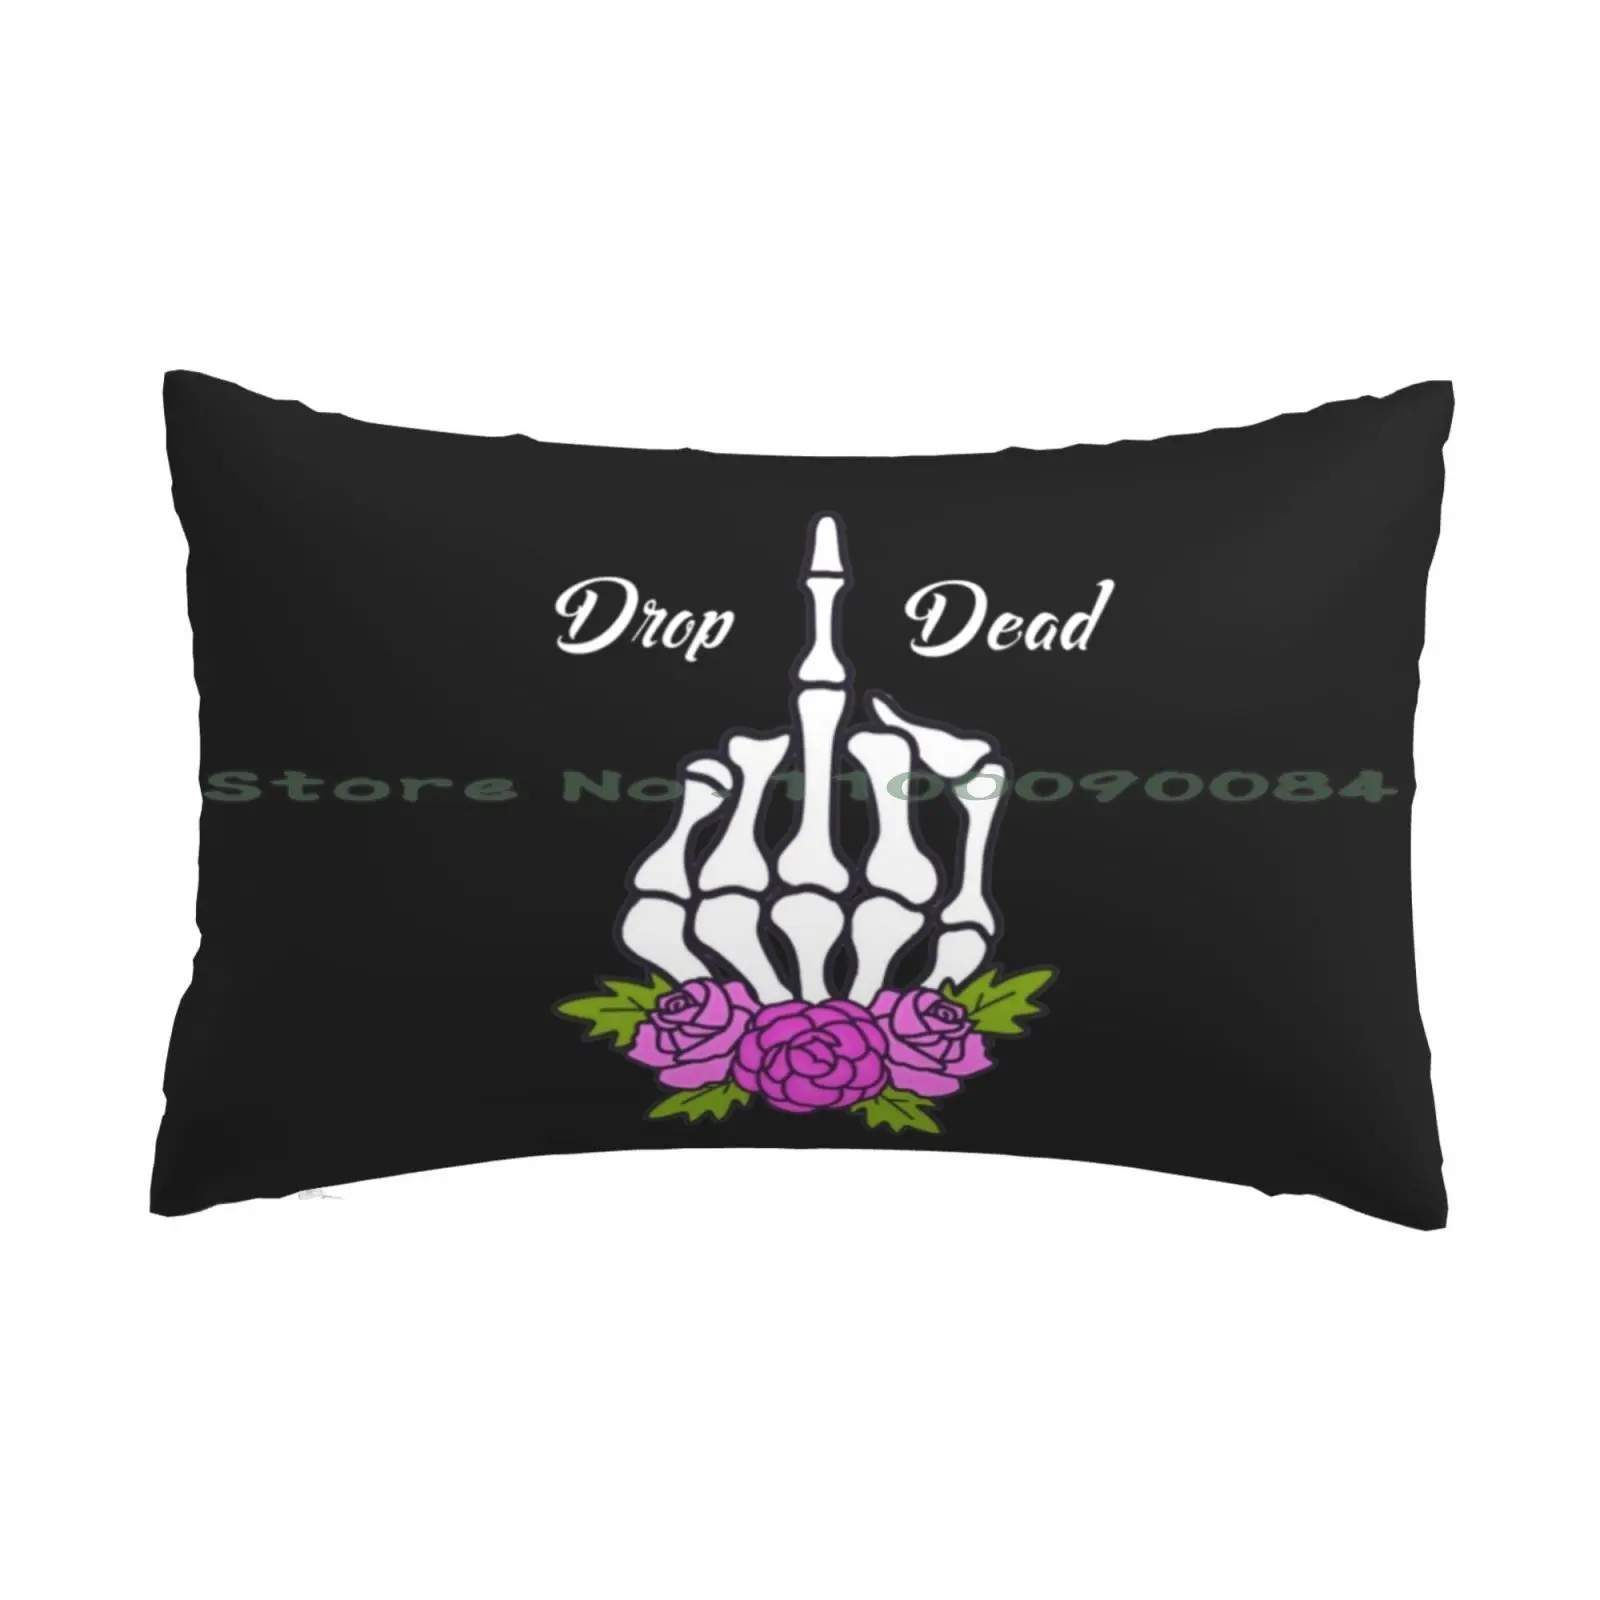 

Drop Dead Skeletal Middle Finger With Roses Pillow Case 20x30 50*75 Sofa Bedroom Achira Nadeeshan Watercolor Cute Nature Summer